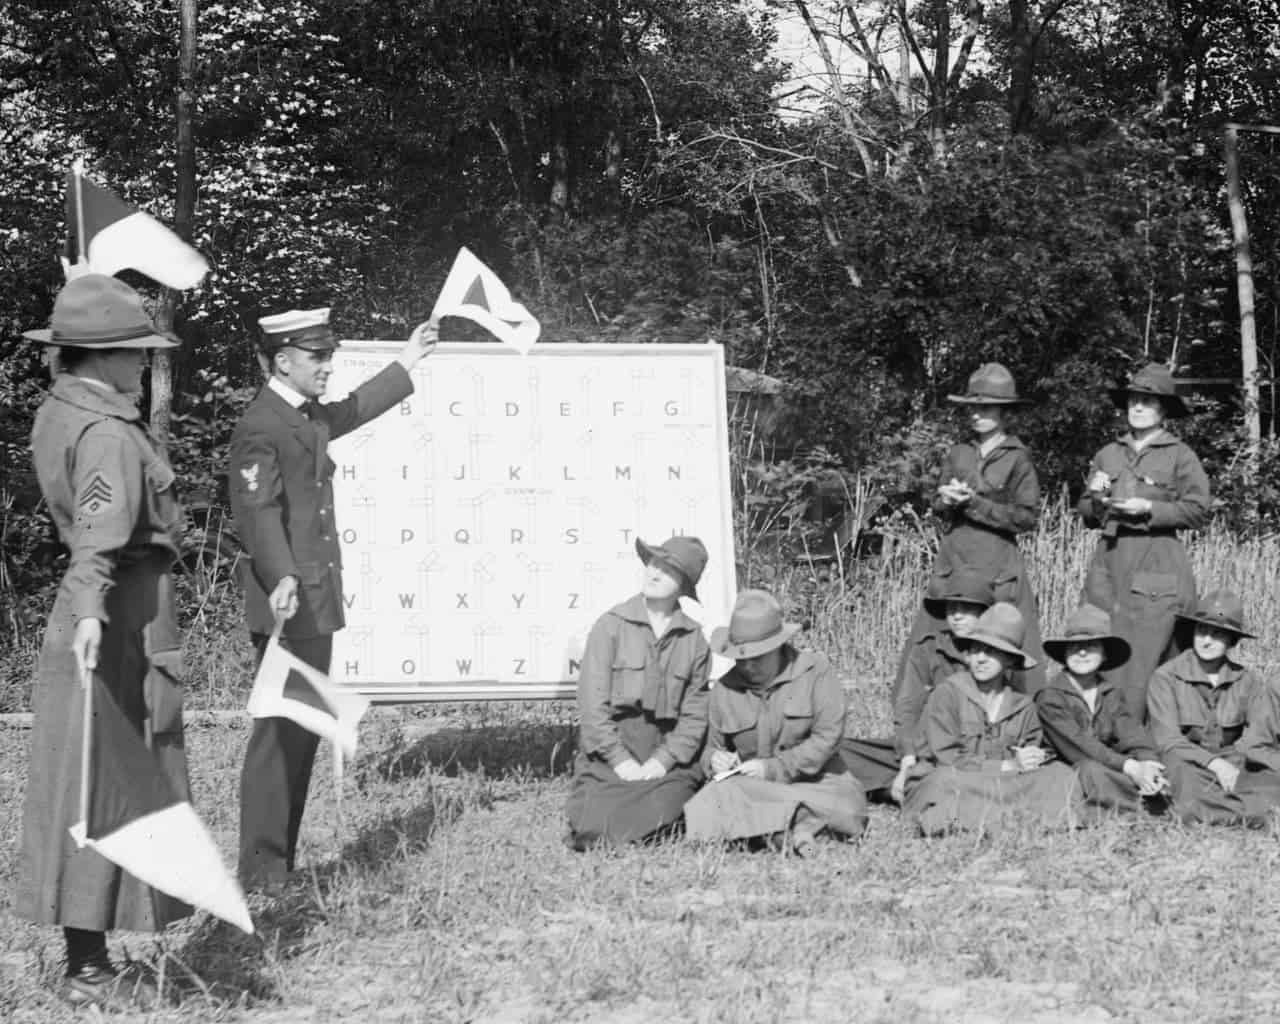 5 uniformed women seated and two on foot to the right, they are looking to the left, where a man and another womenare showingyon some flags. Between them a white board with some letters. Behind them, some trees.